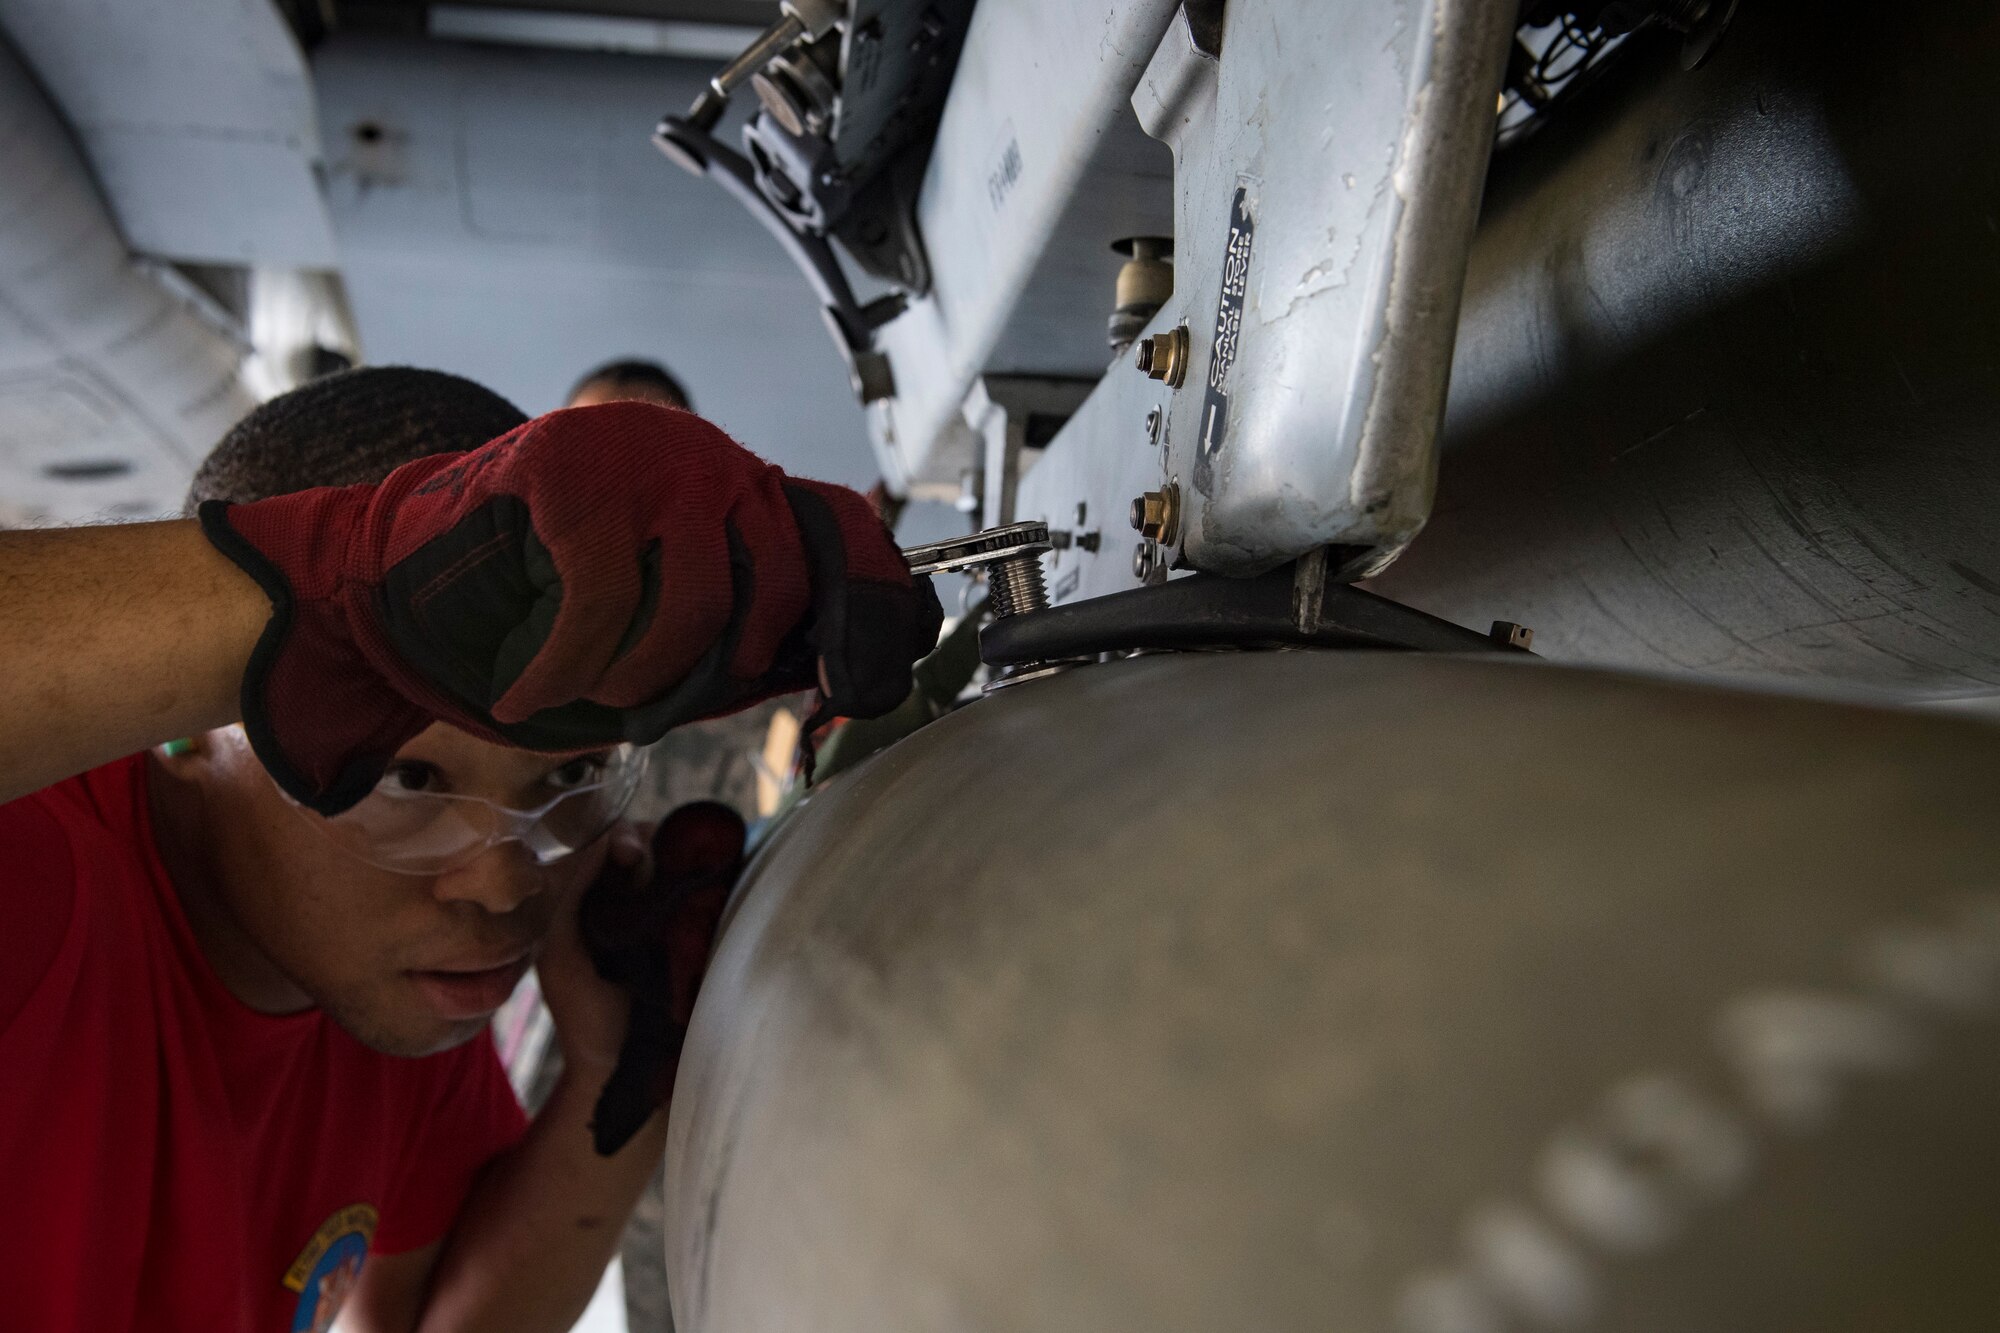 Airman 1st Class Maleek Hurd, 75th Aircraft Maintenance Unit weapons load crew member, secures an inert munition on an A-10C Thunderbolt II during a weapons load competition, April 9, 2018, at Moody Air Force Base, Ga. The 75th and 74th AMUs went head to head with each crew competing to load three munitions onto an A-10 quicker and with less discrepancies than the other. Crews were also judged on dress and appearance and a written test based on munitions knowledge. (U.S. Air Force photo by Senior Airman Janiqua P. Robinson)